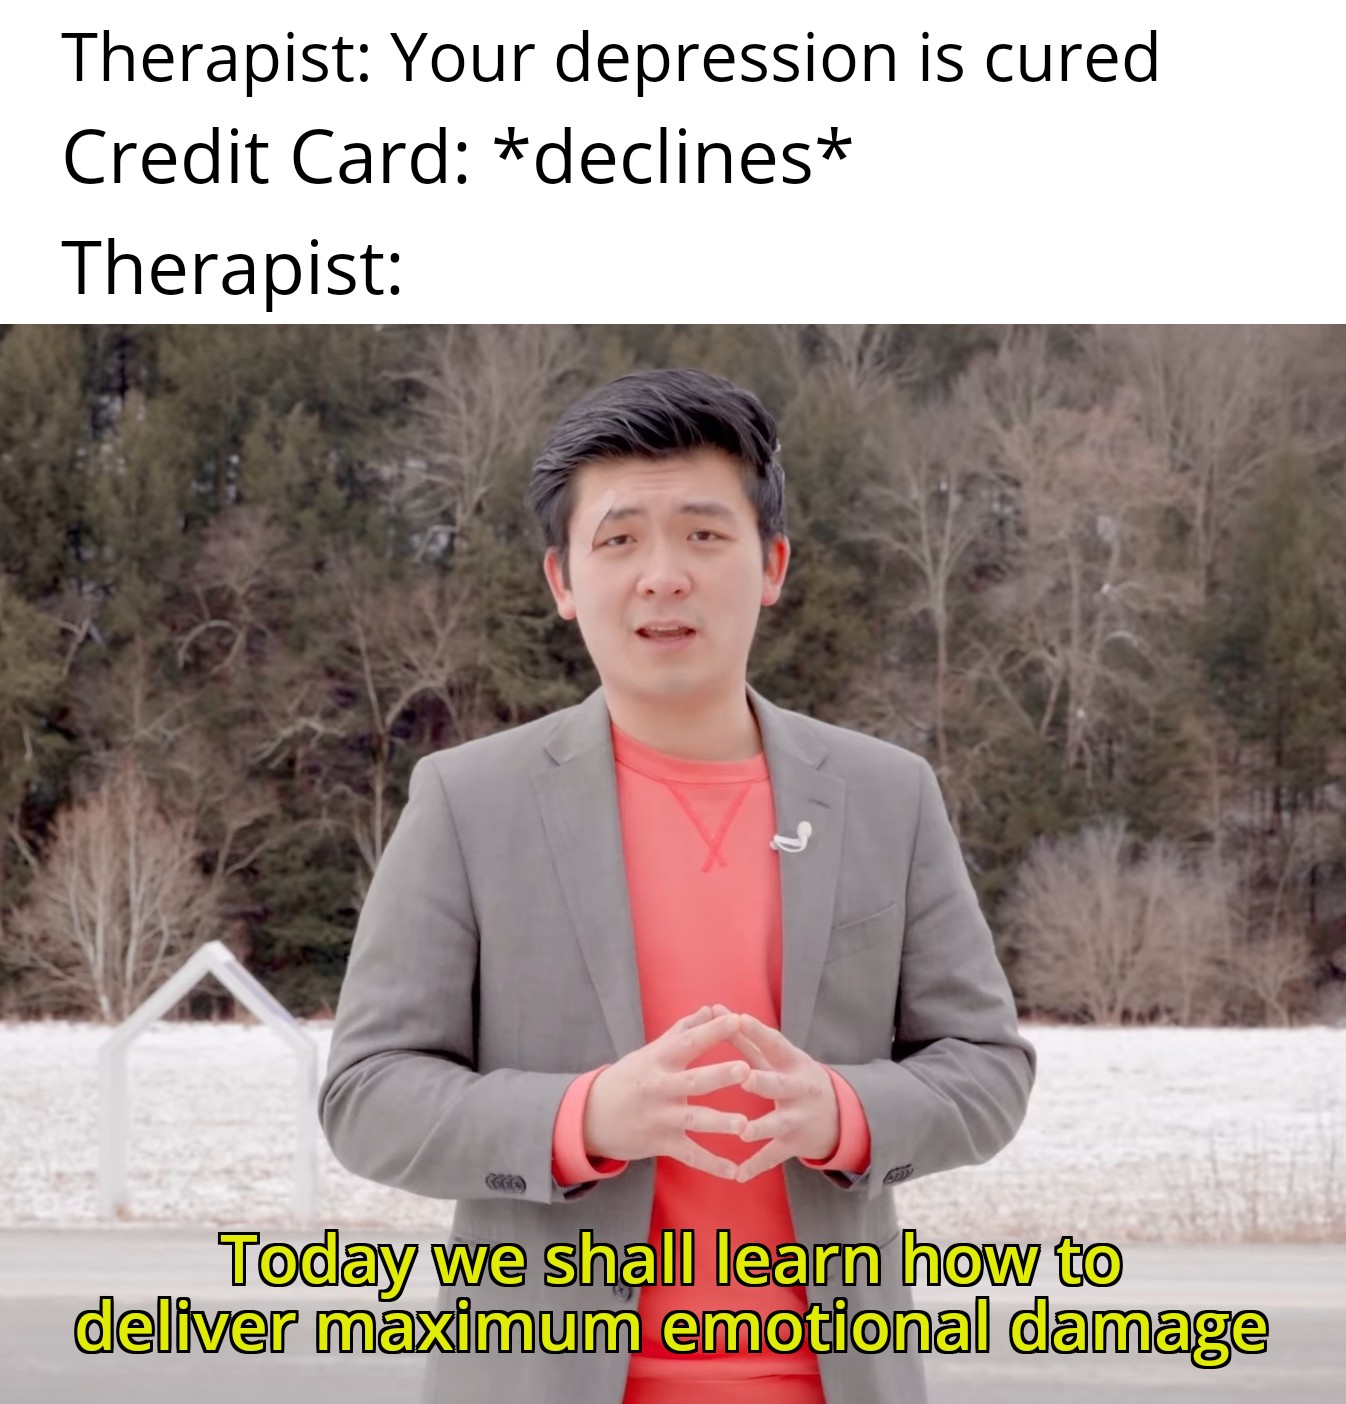 dank memes - funny memes - photo caption - Therapist Your depression is cured Credit Card declines Therapist Today we shall learn how to deliver maximum emotional damage